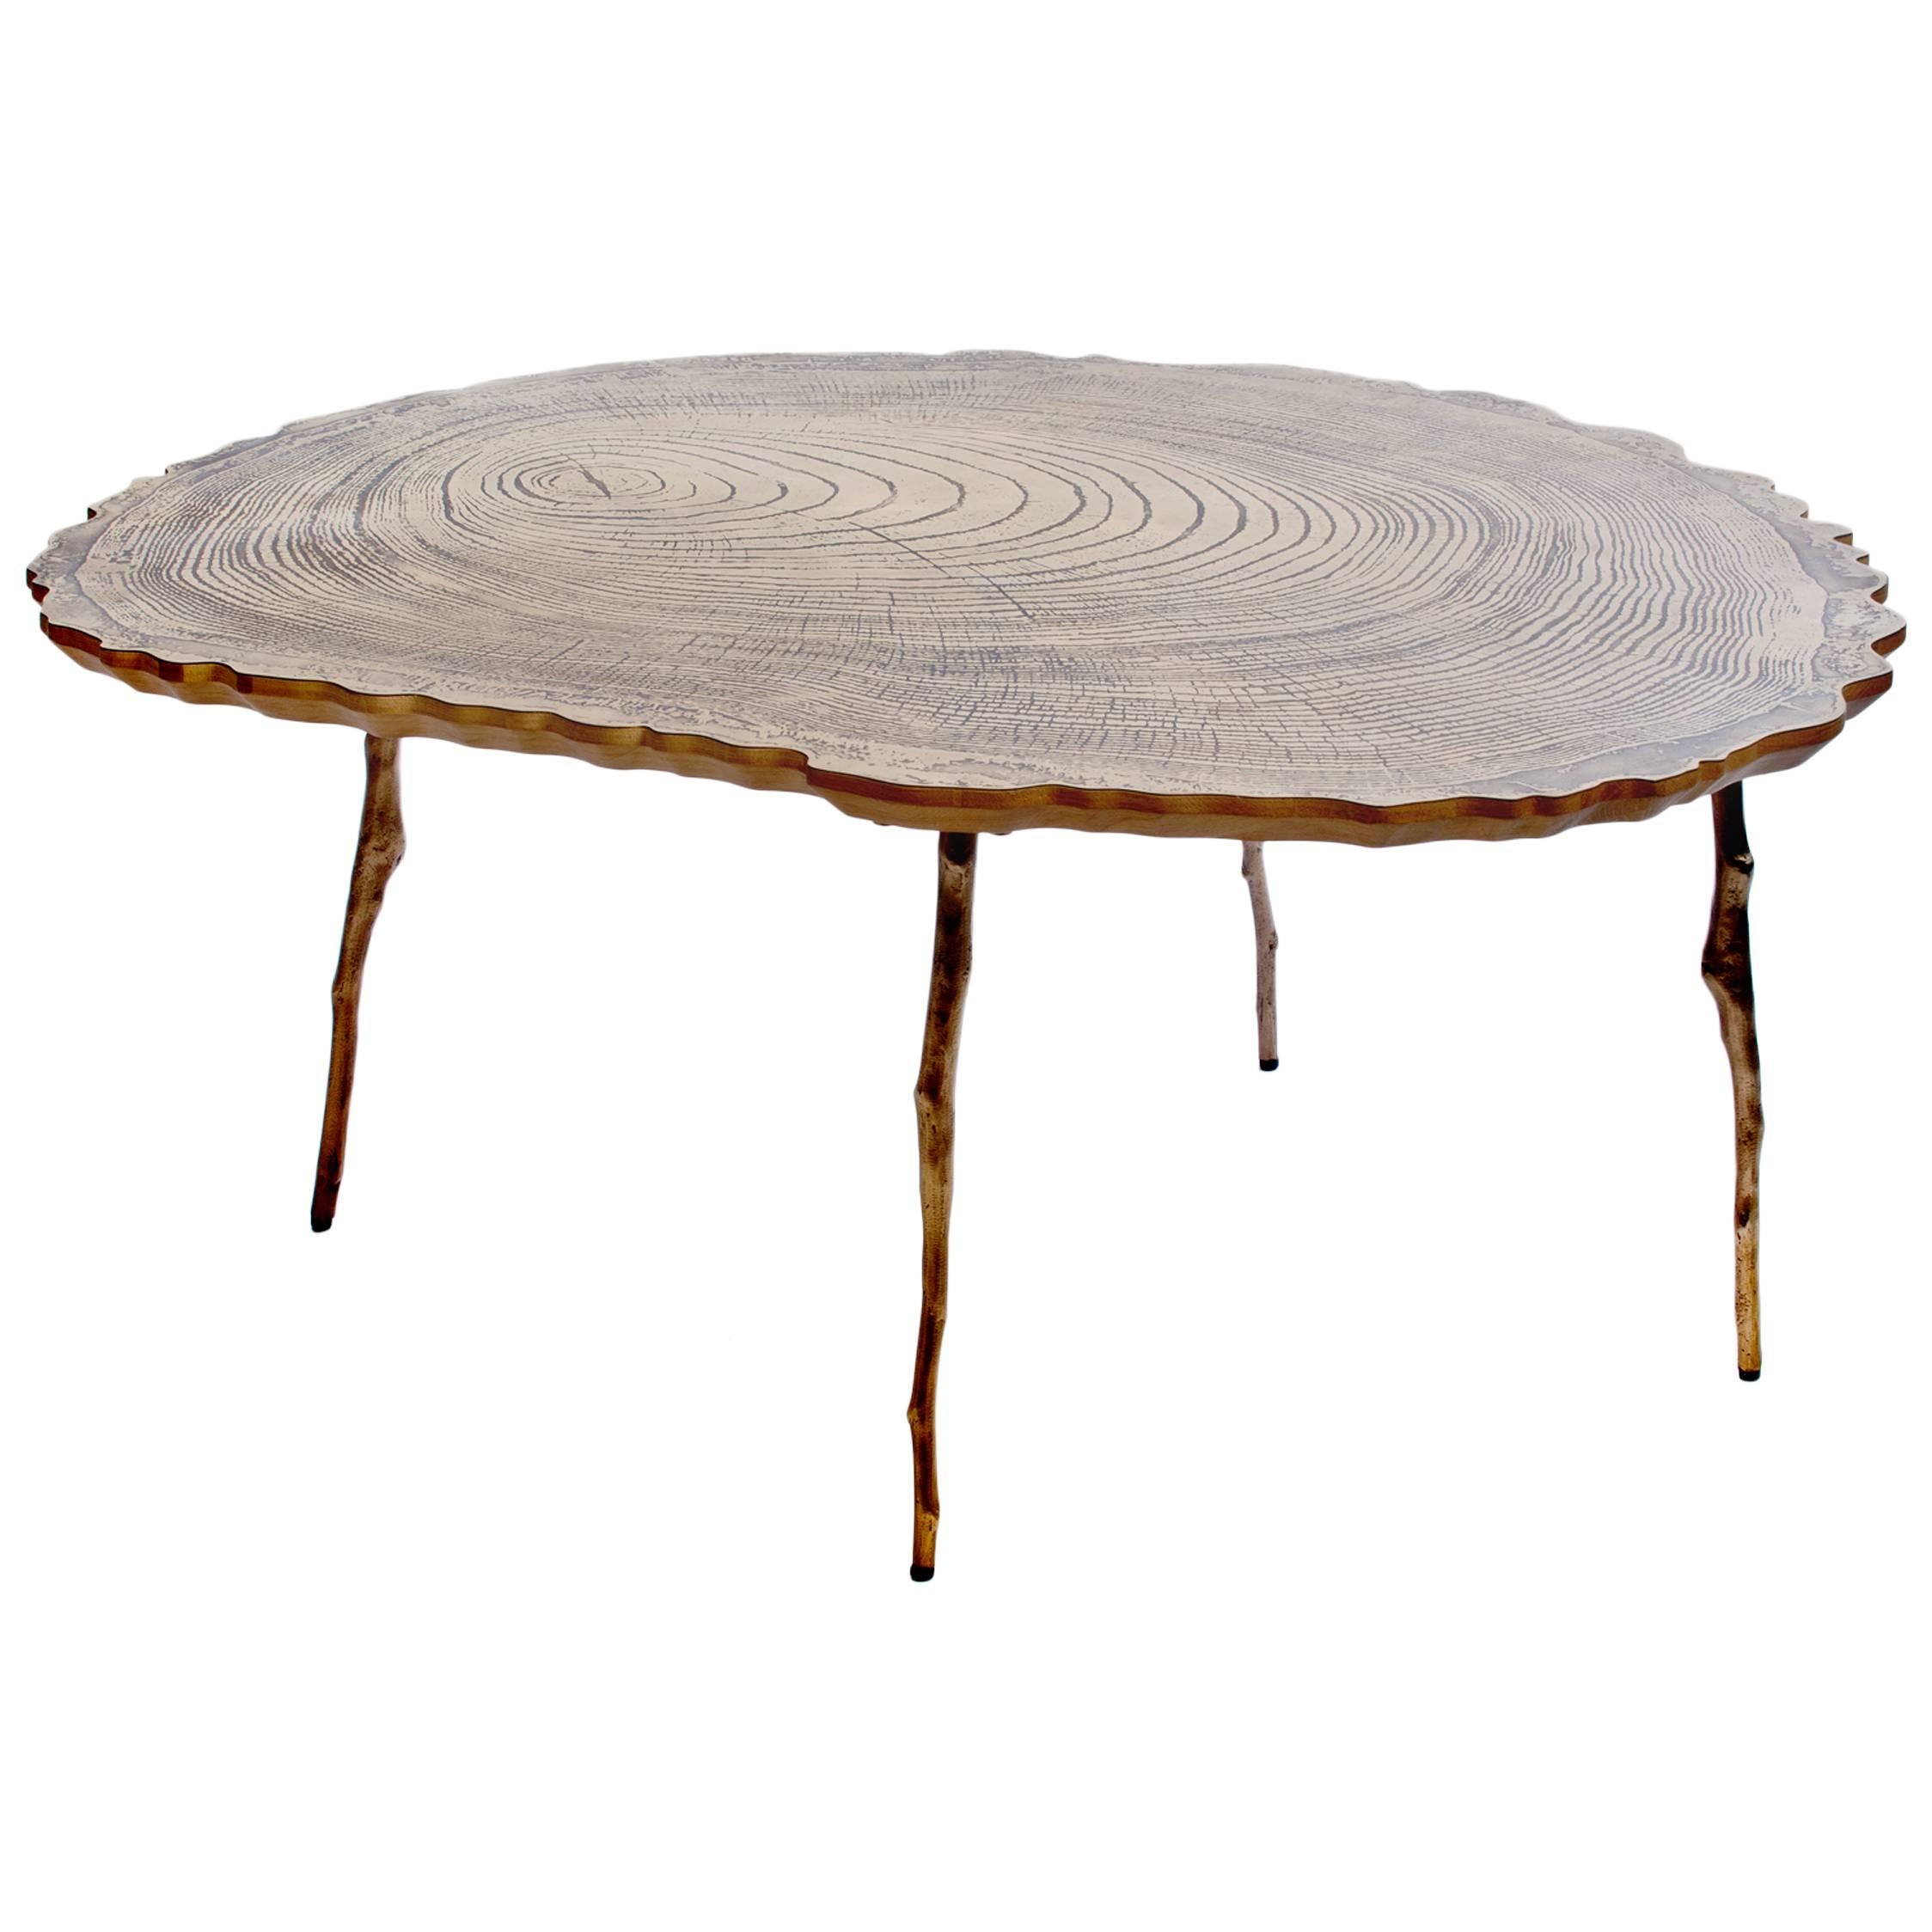 Lean Coffee Table with Tree Rings in Bronze and Laminated Oak by Sharon Sides